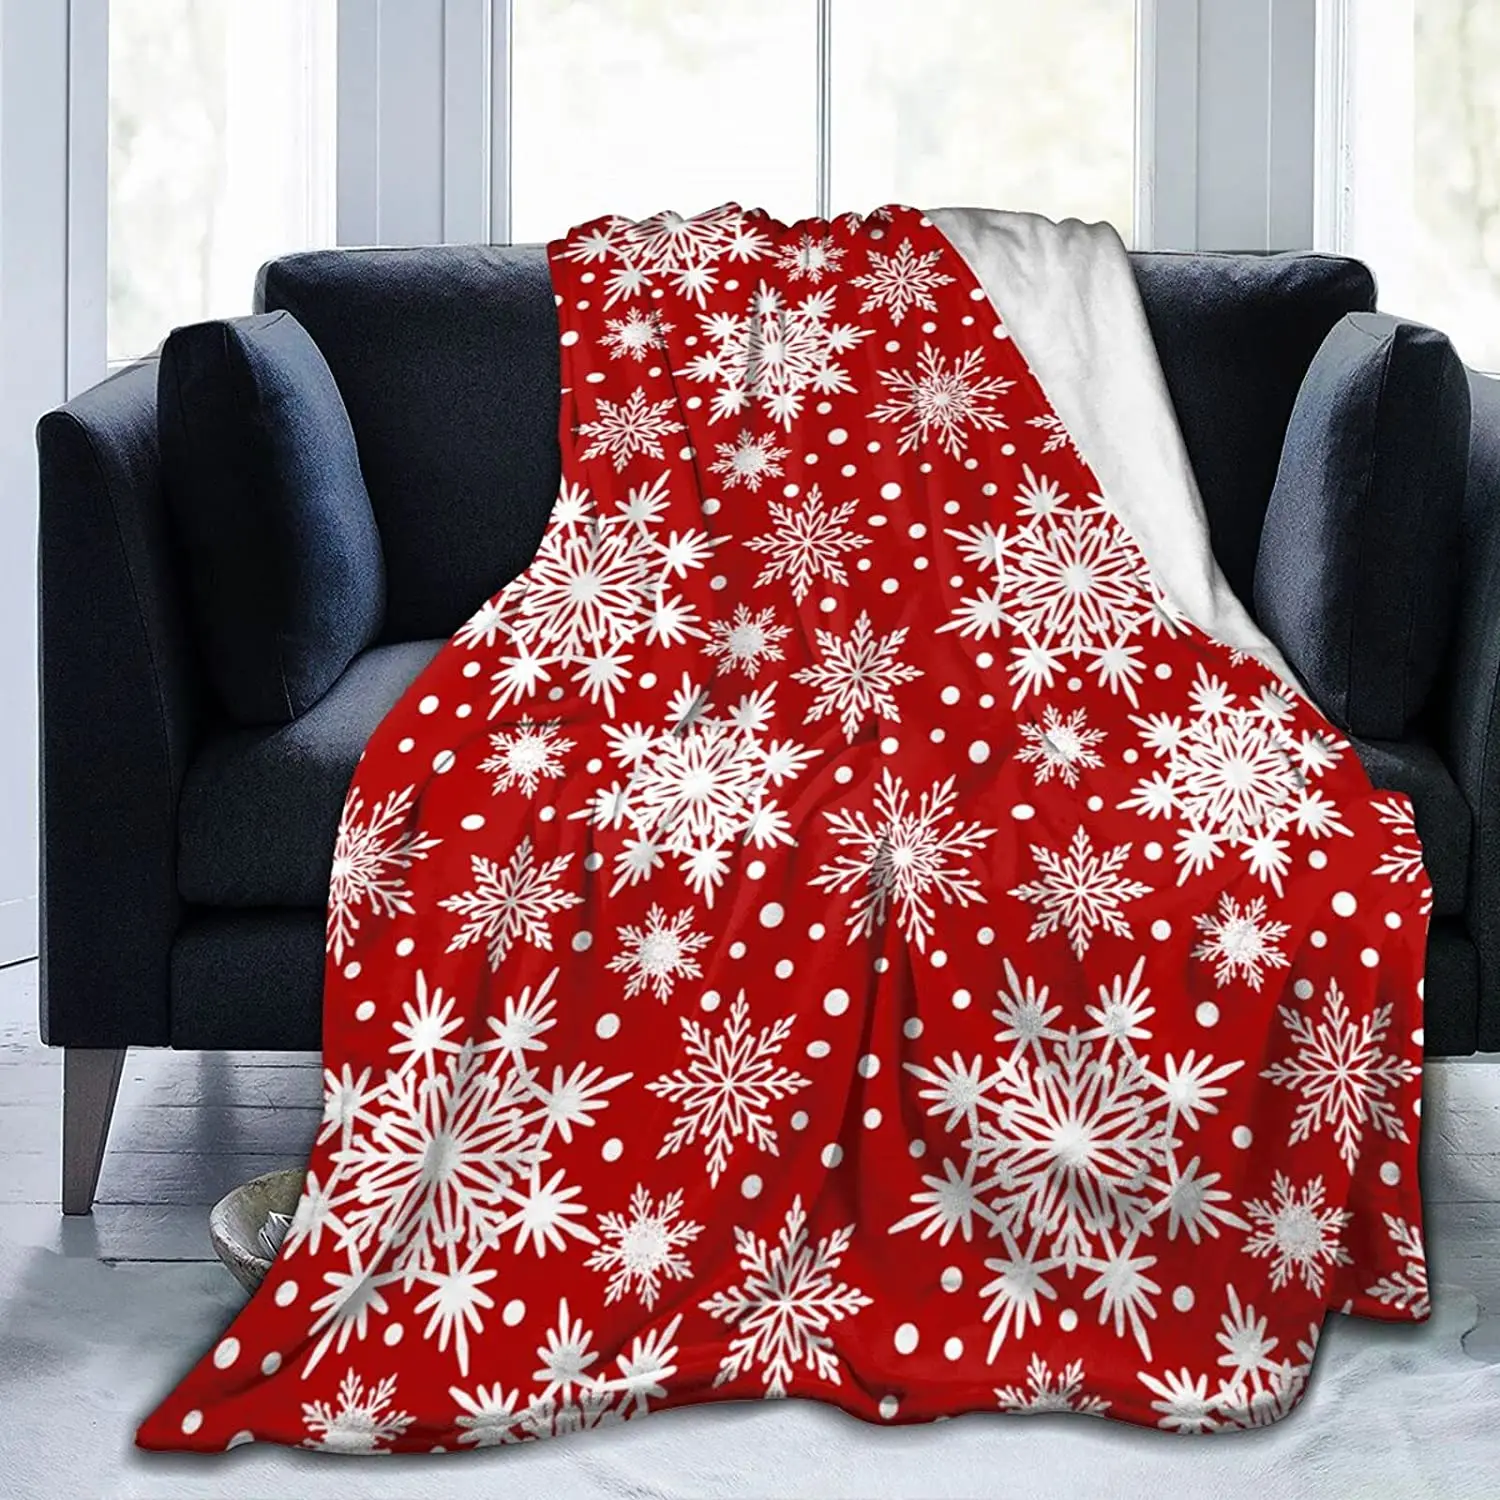 

Winter Snowflakes Red Throw Blanket Ultra Soft Warm All Season Christmas Decorative Fleece Blankets for Bed Chair Car Sofa Couch